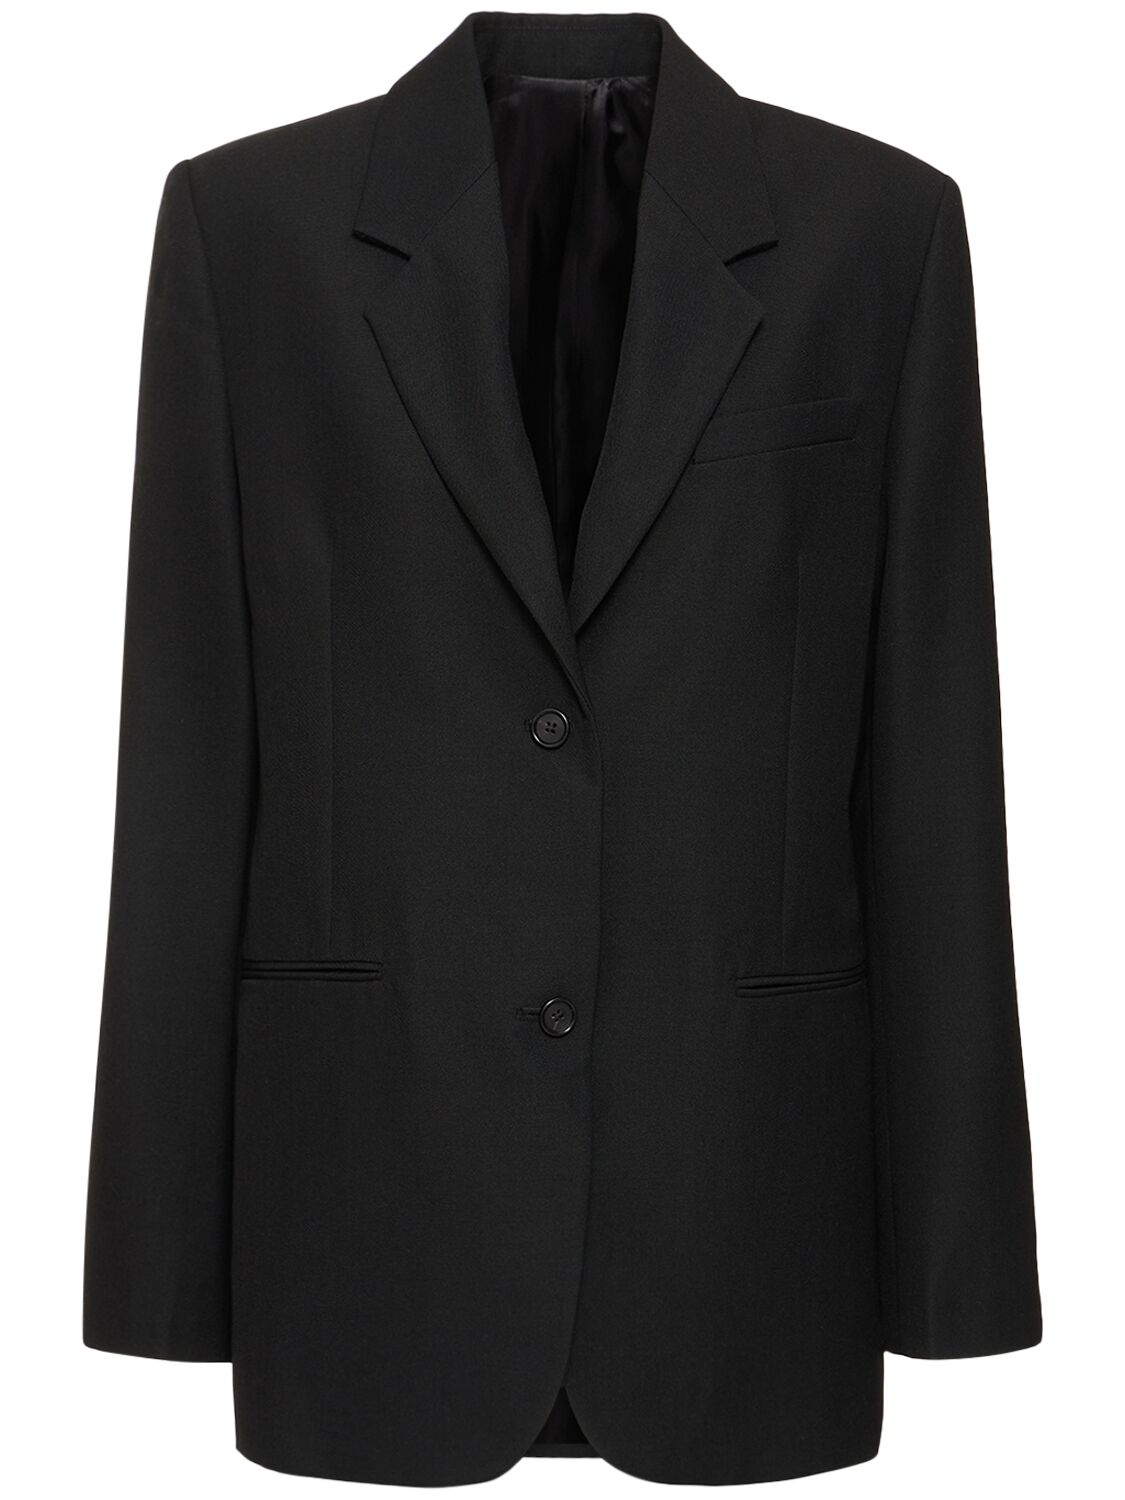 Image of Tailored Wool Blend Jacket